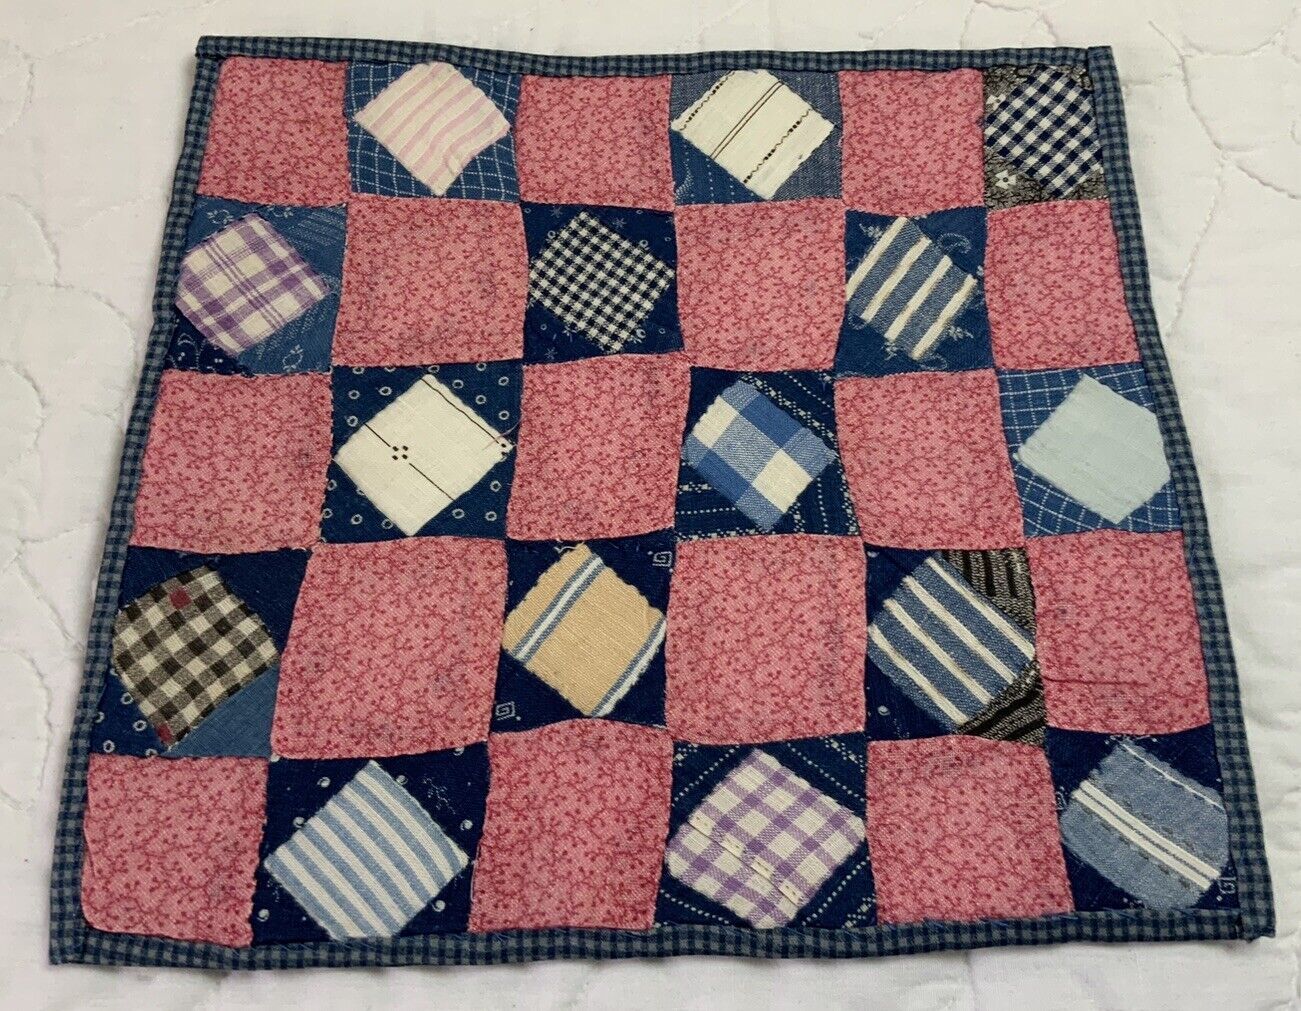 Antique Patchwork Quilt Table Topper, Small Squares & Triangles, Early Calicos